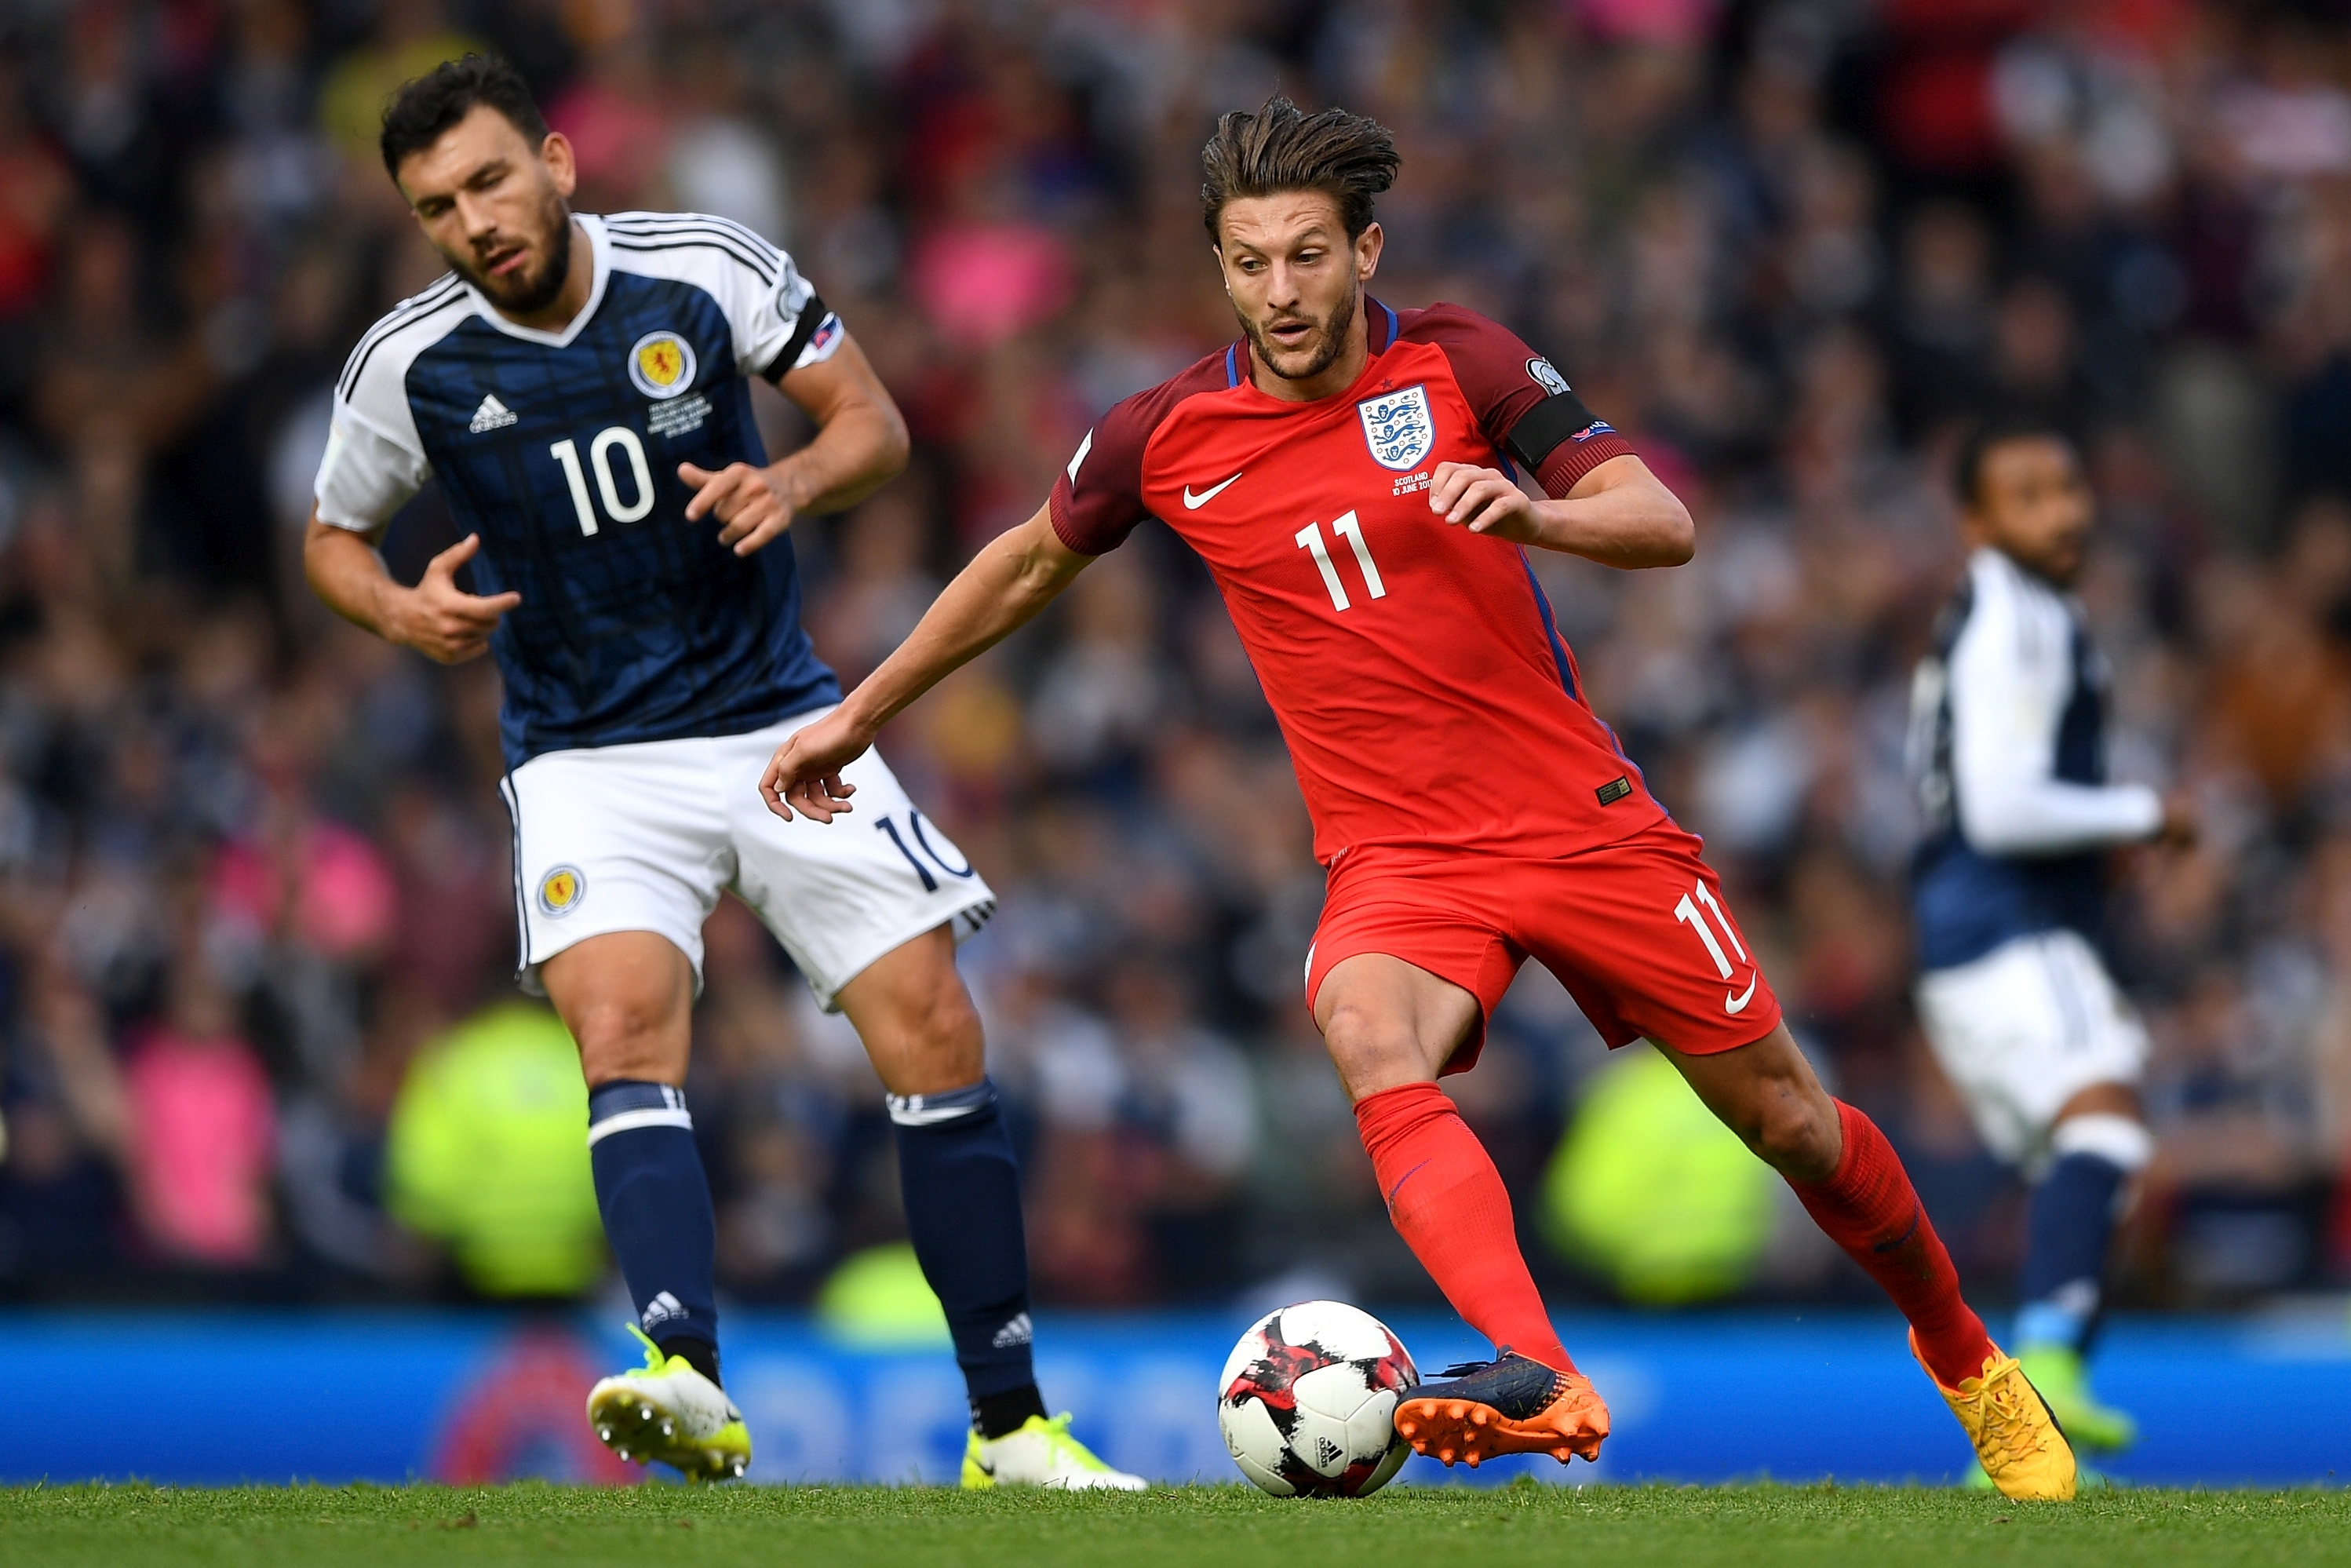 Adam Lallana of England takes the ball past Robert Snodgrass of Scotland during the FIFA 2018 World Cup Qualifier between Scotland and England at Hampden Park National Stadium on June 10, 2017 in Glasgow, Scotland. (Photo by Shaun Botterill/Getty Images)